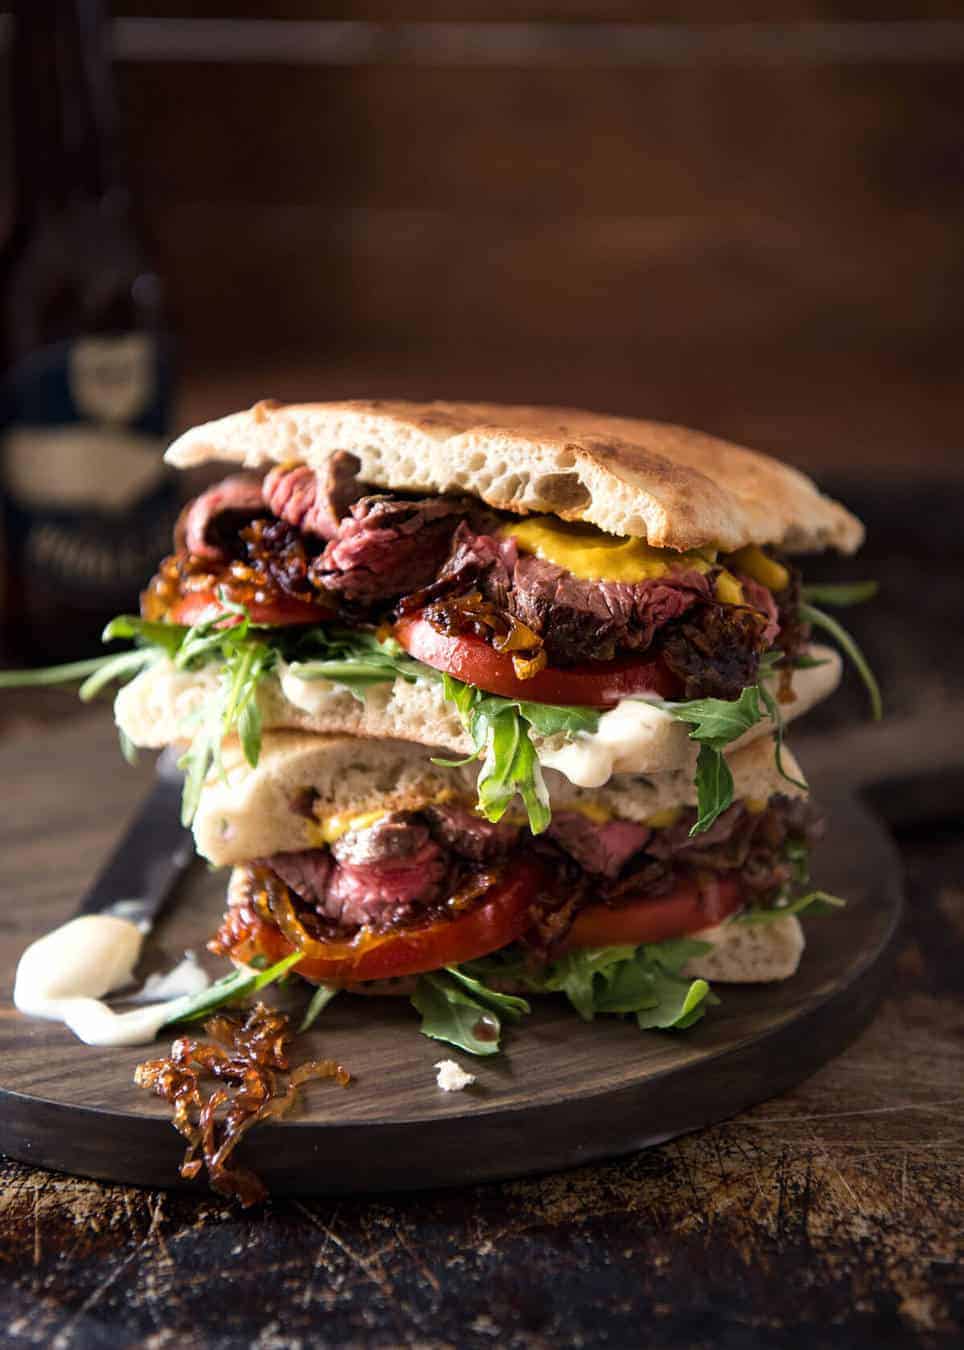 A juicy Steak Sandwich loaded with tender slices of steak, caramelised onion, garlic aioli, lettuce, tomato and mustard. www.recipetineats.com